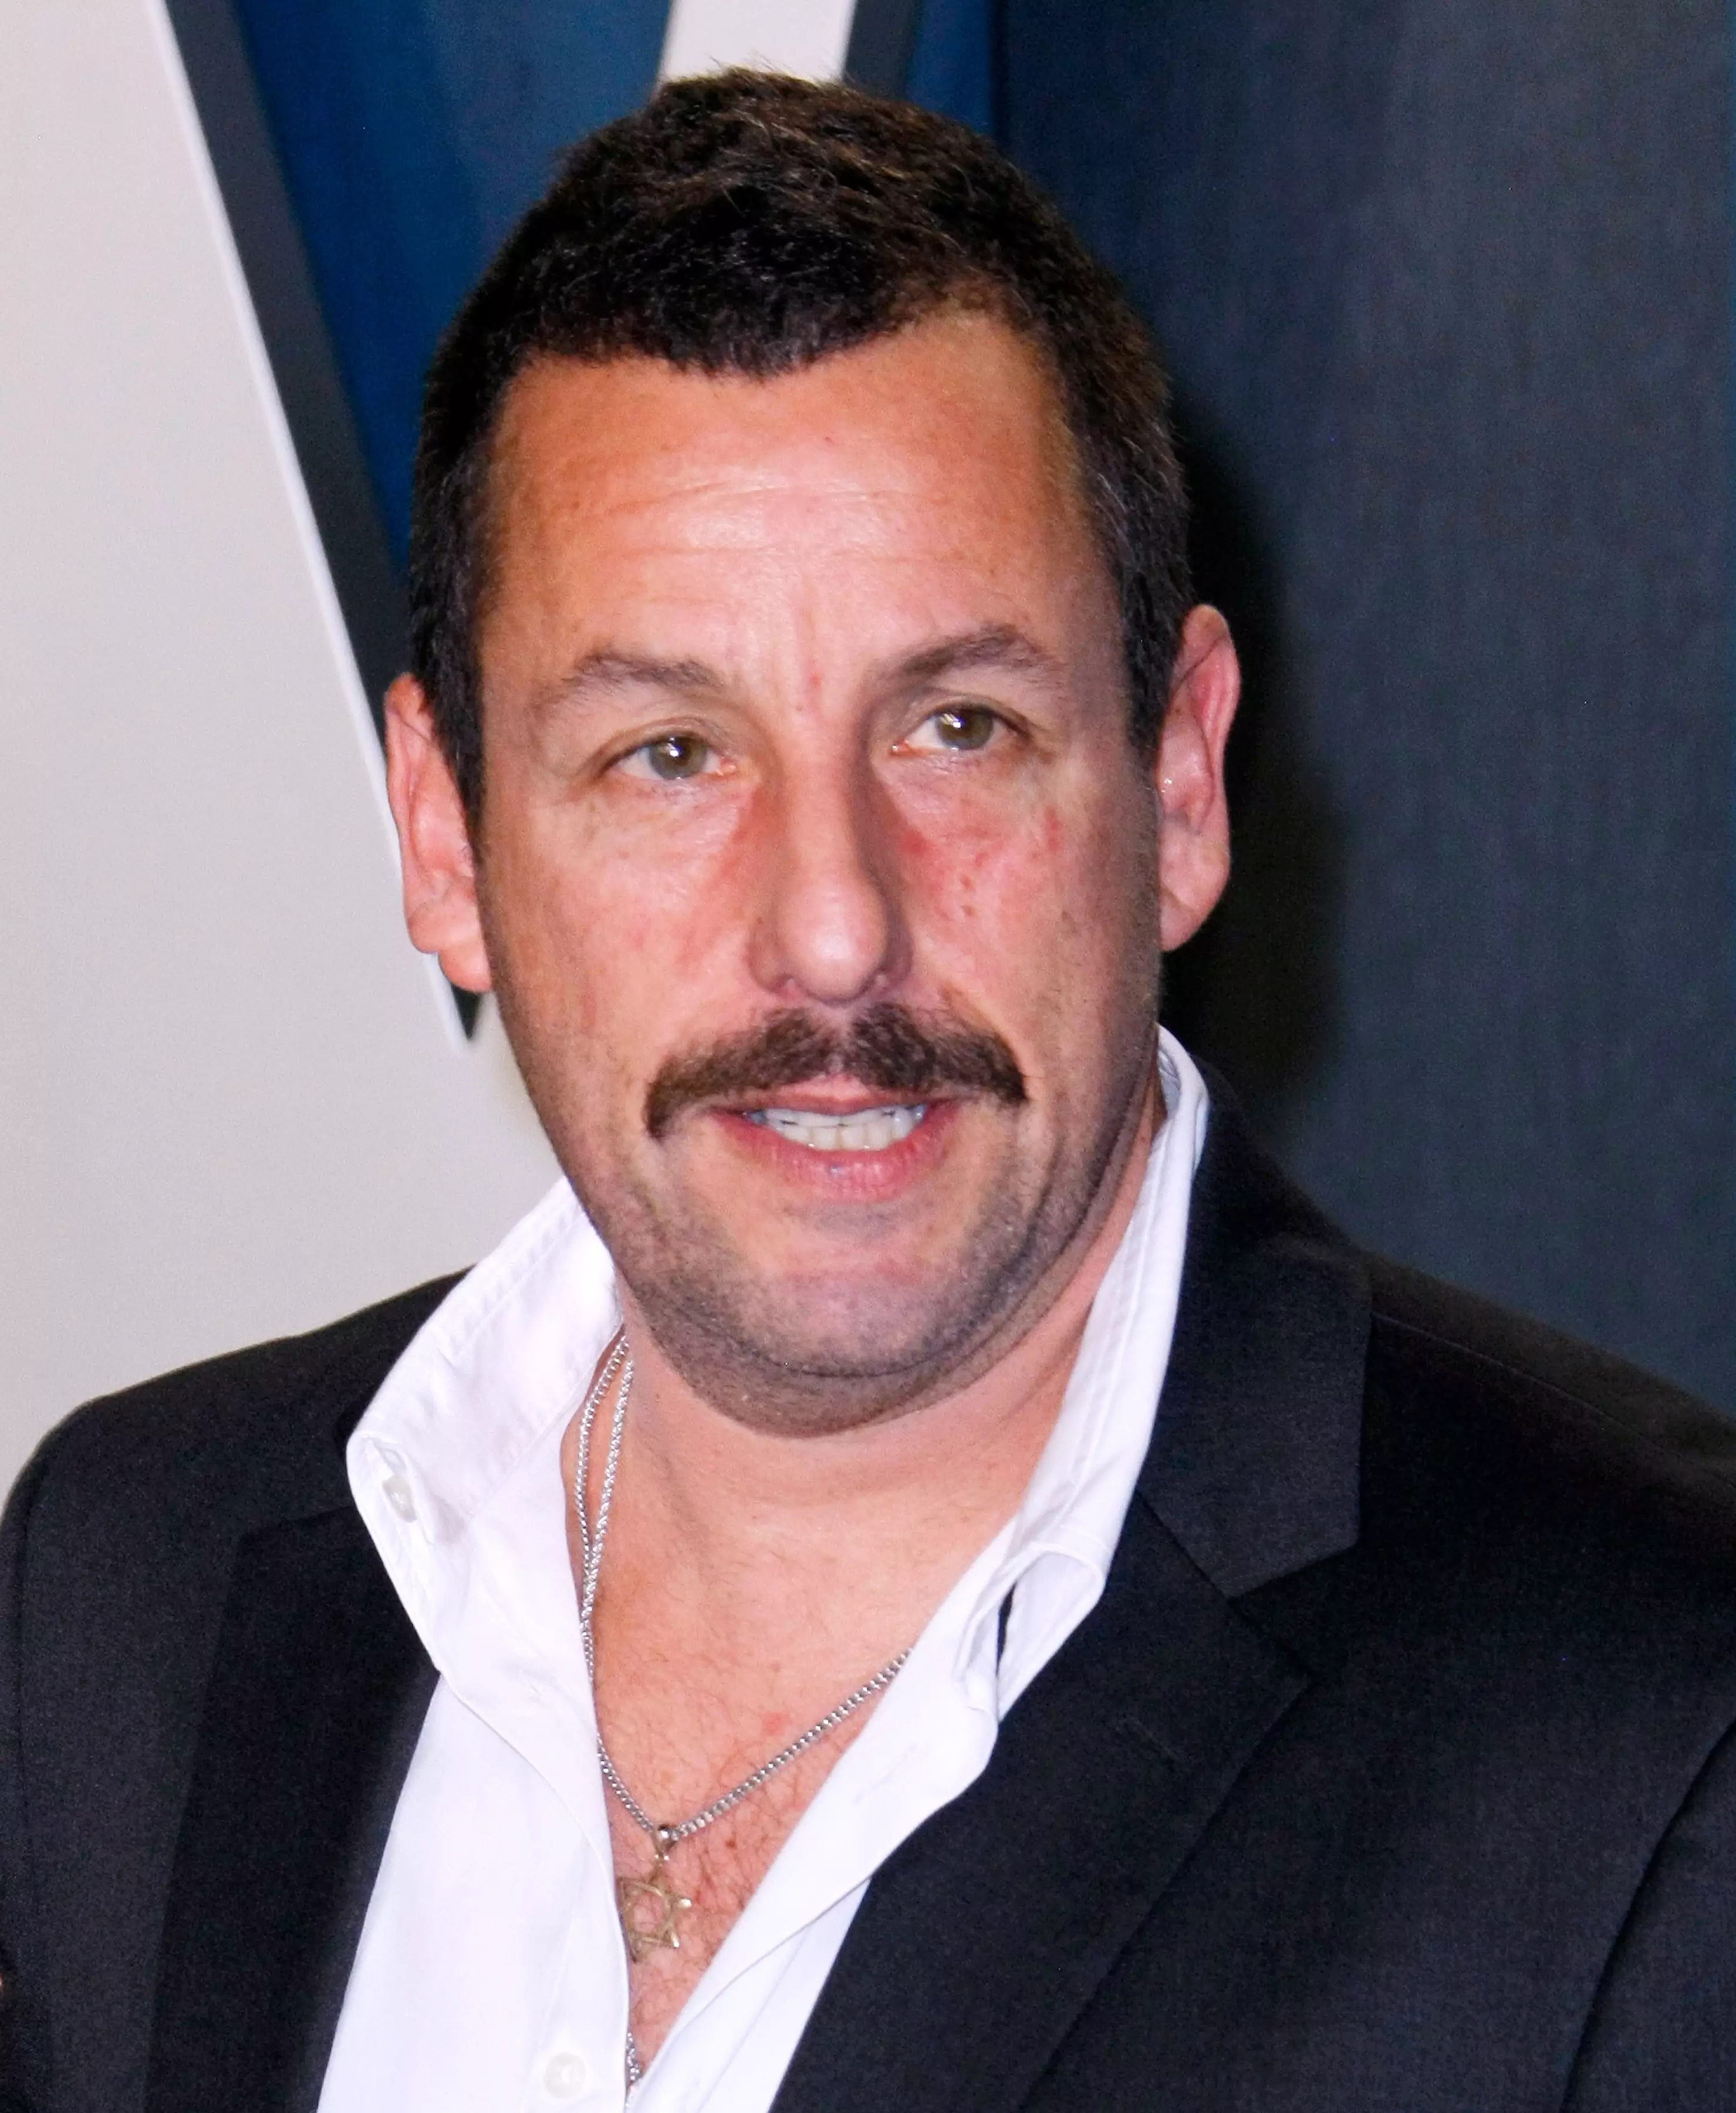 Sandler was best mates with Meatball.